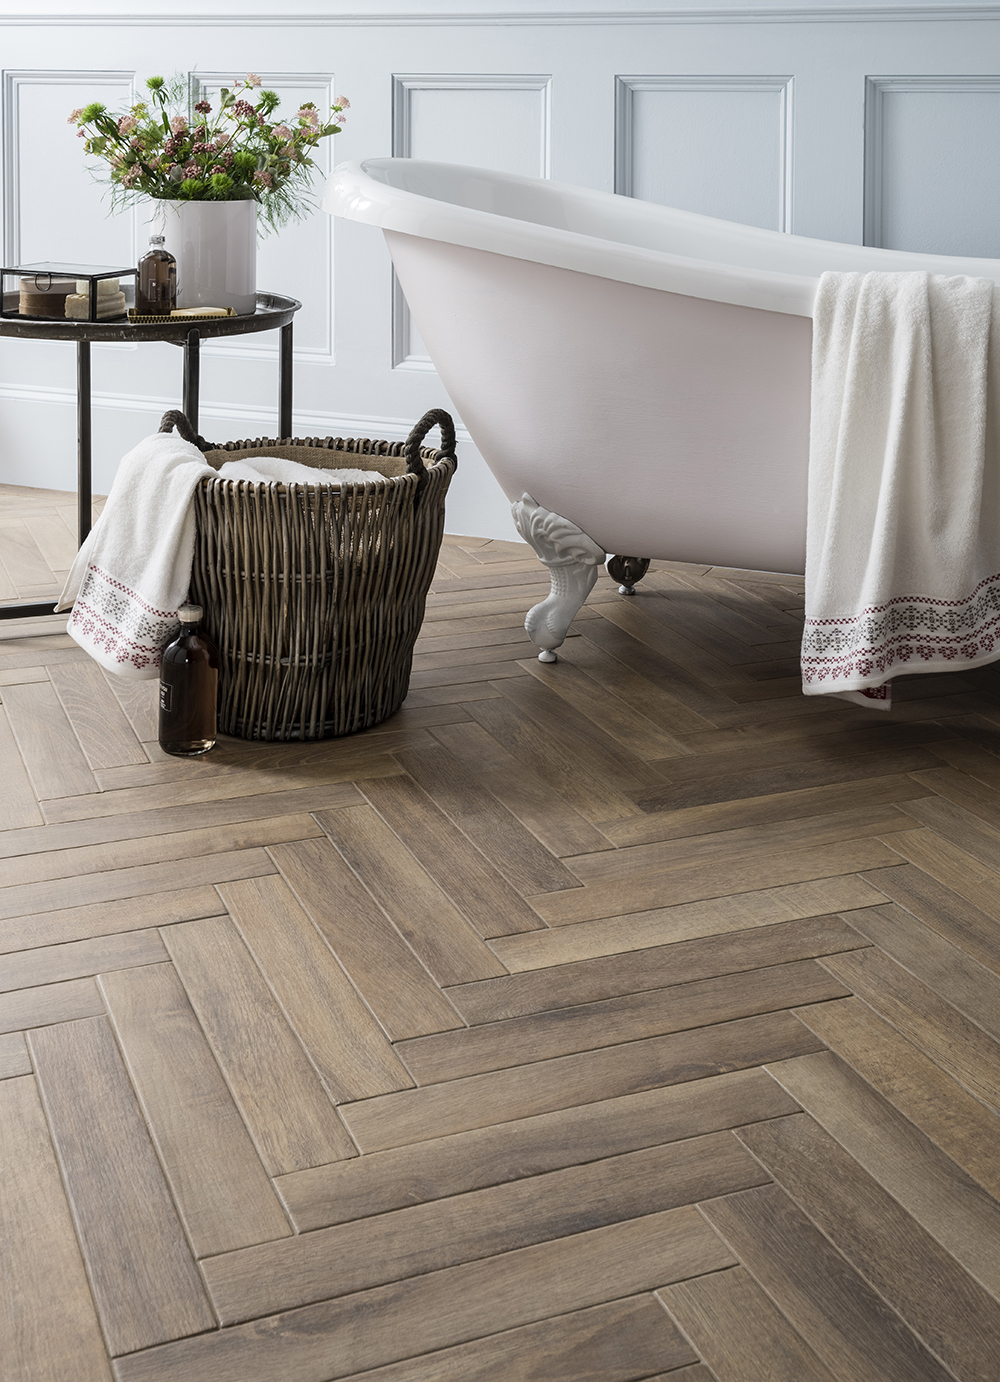 Andira by Topps Tiles